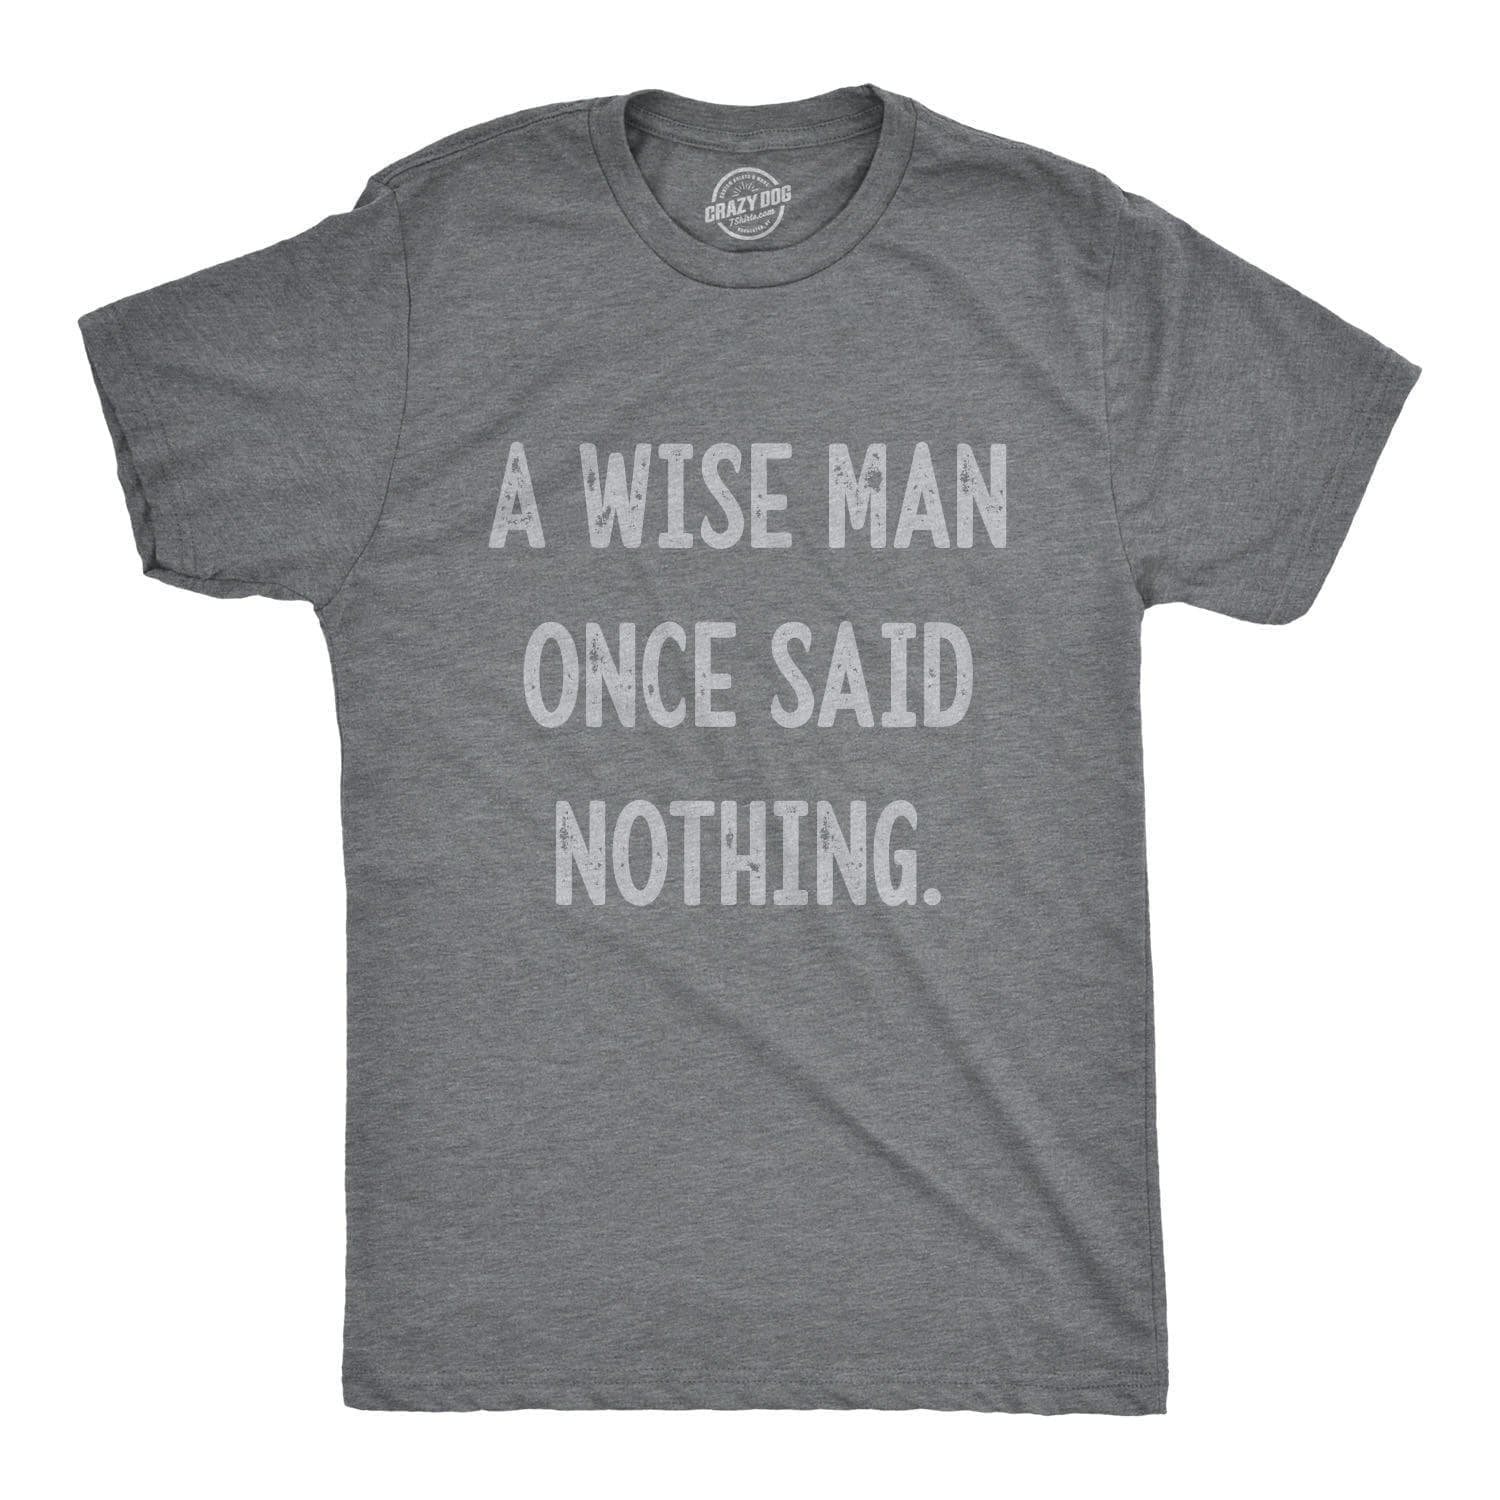 A Wise Man Once Said Nothing Men's Tshirt - Crazy Dog T-Shirts